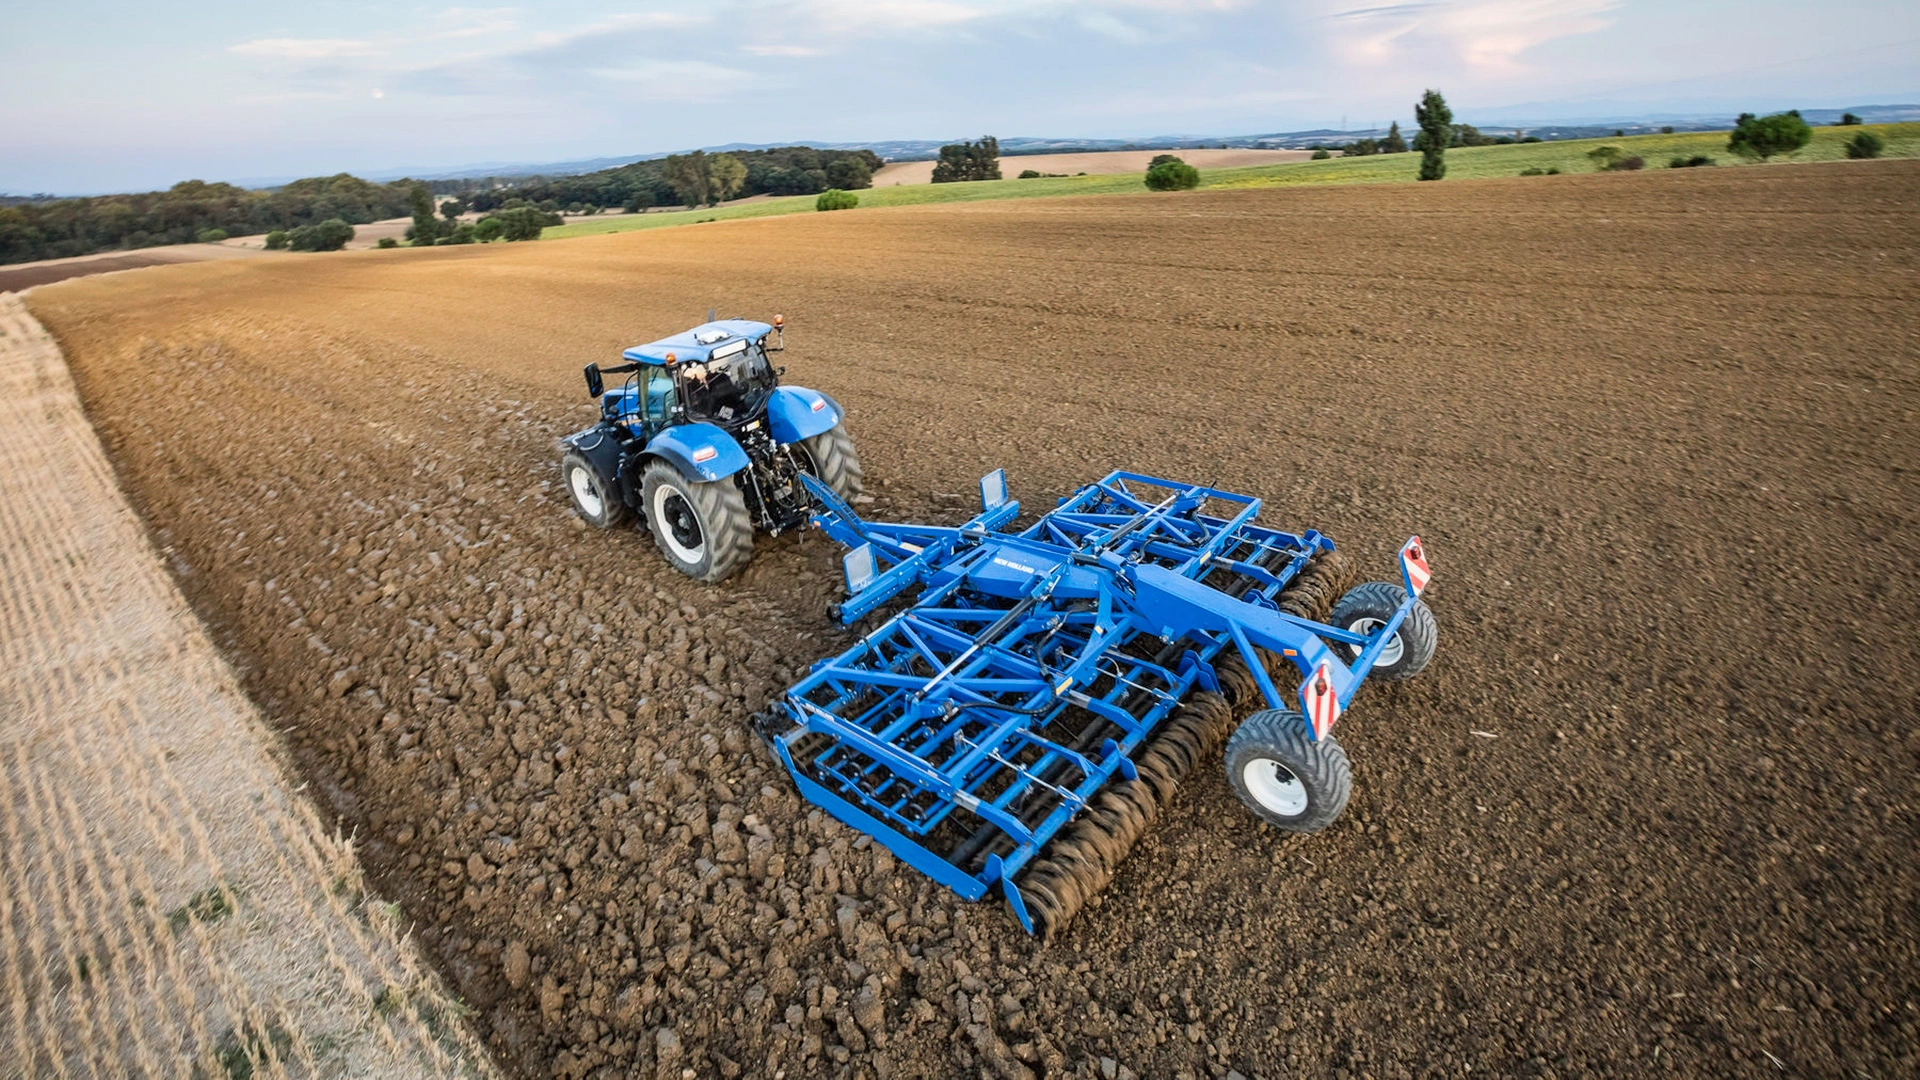 T7 LWB Tractor working on the agricultural field with tillage equipment